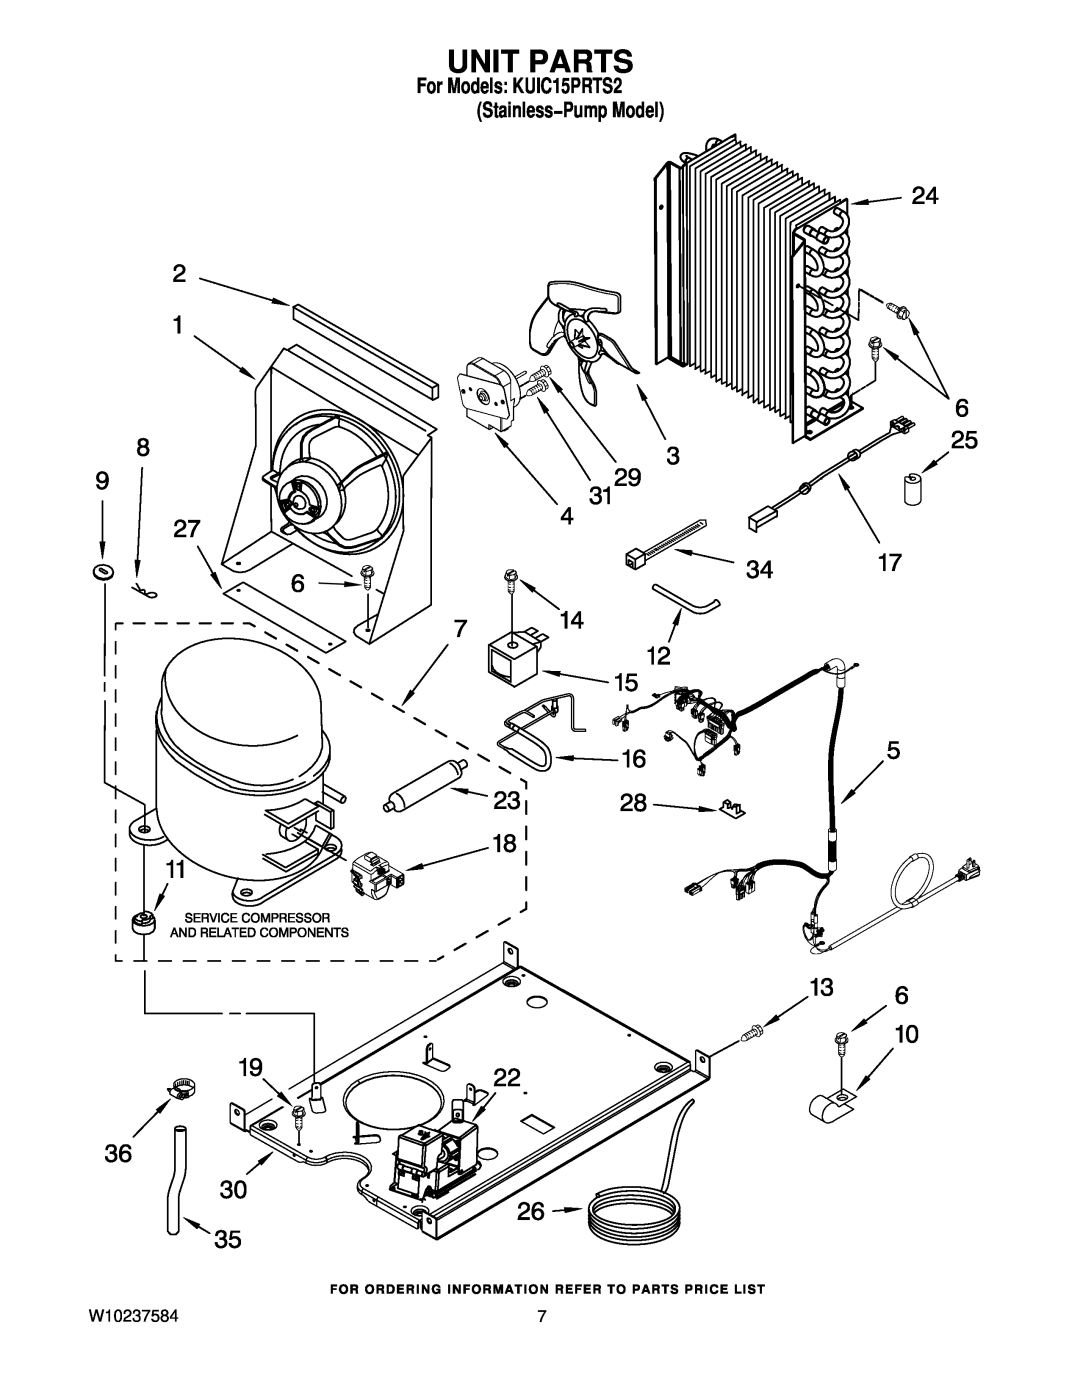 KitchenAid manual Unit Parts, W10237584, For Models KUIC15PRTS2 Stainless−Pump Model 